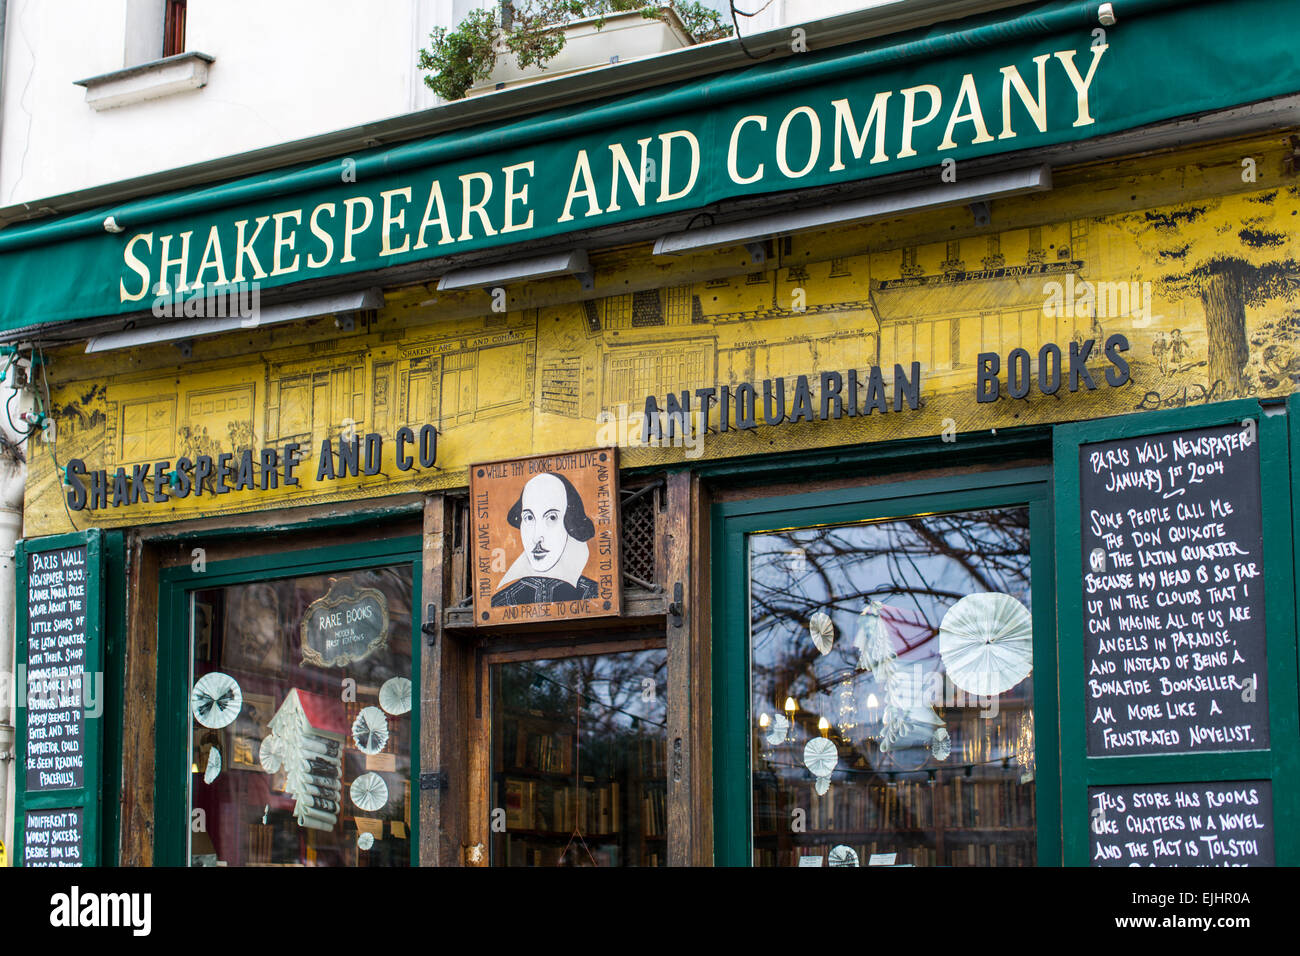 Librairie Shakespeare and Company, Paris, France Banque D'Images